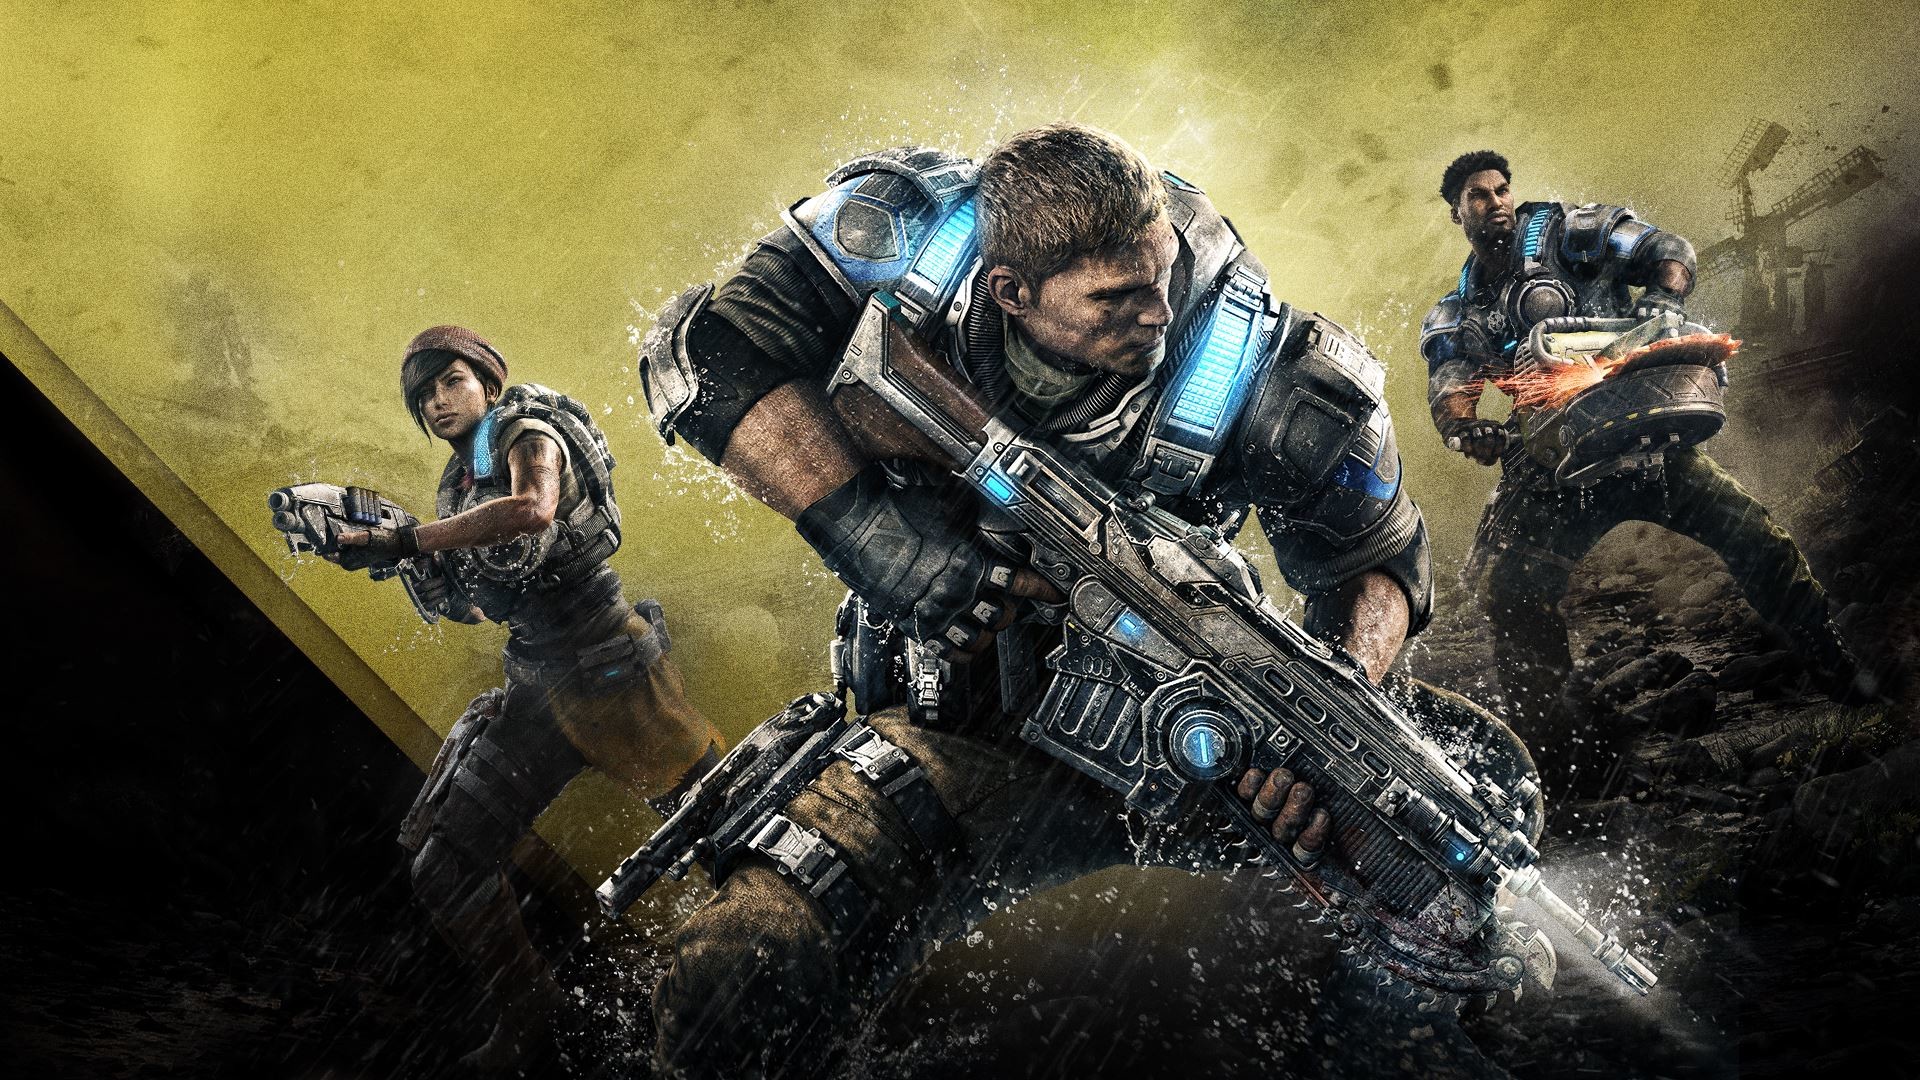 1920x1080 Amazing Gears Of War 4 Pictures & Backgrounds